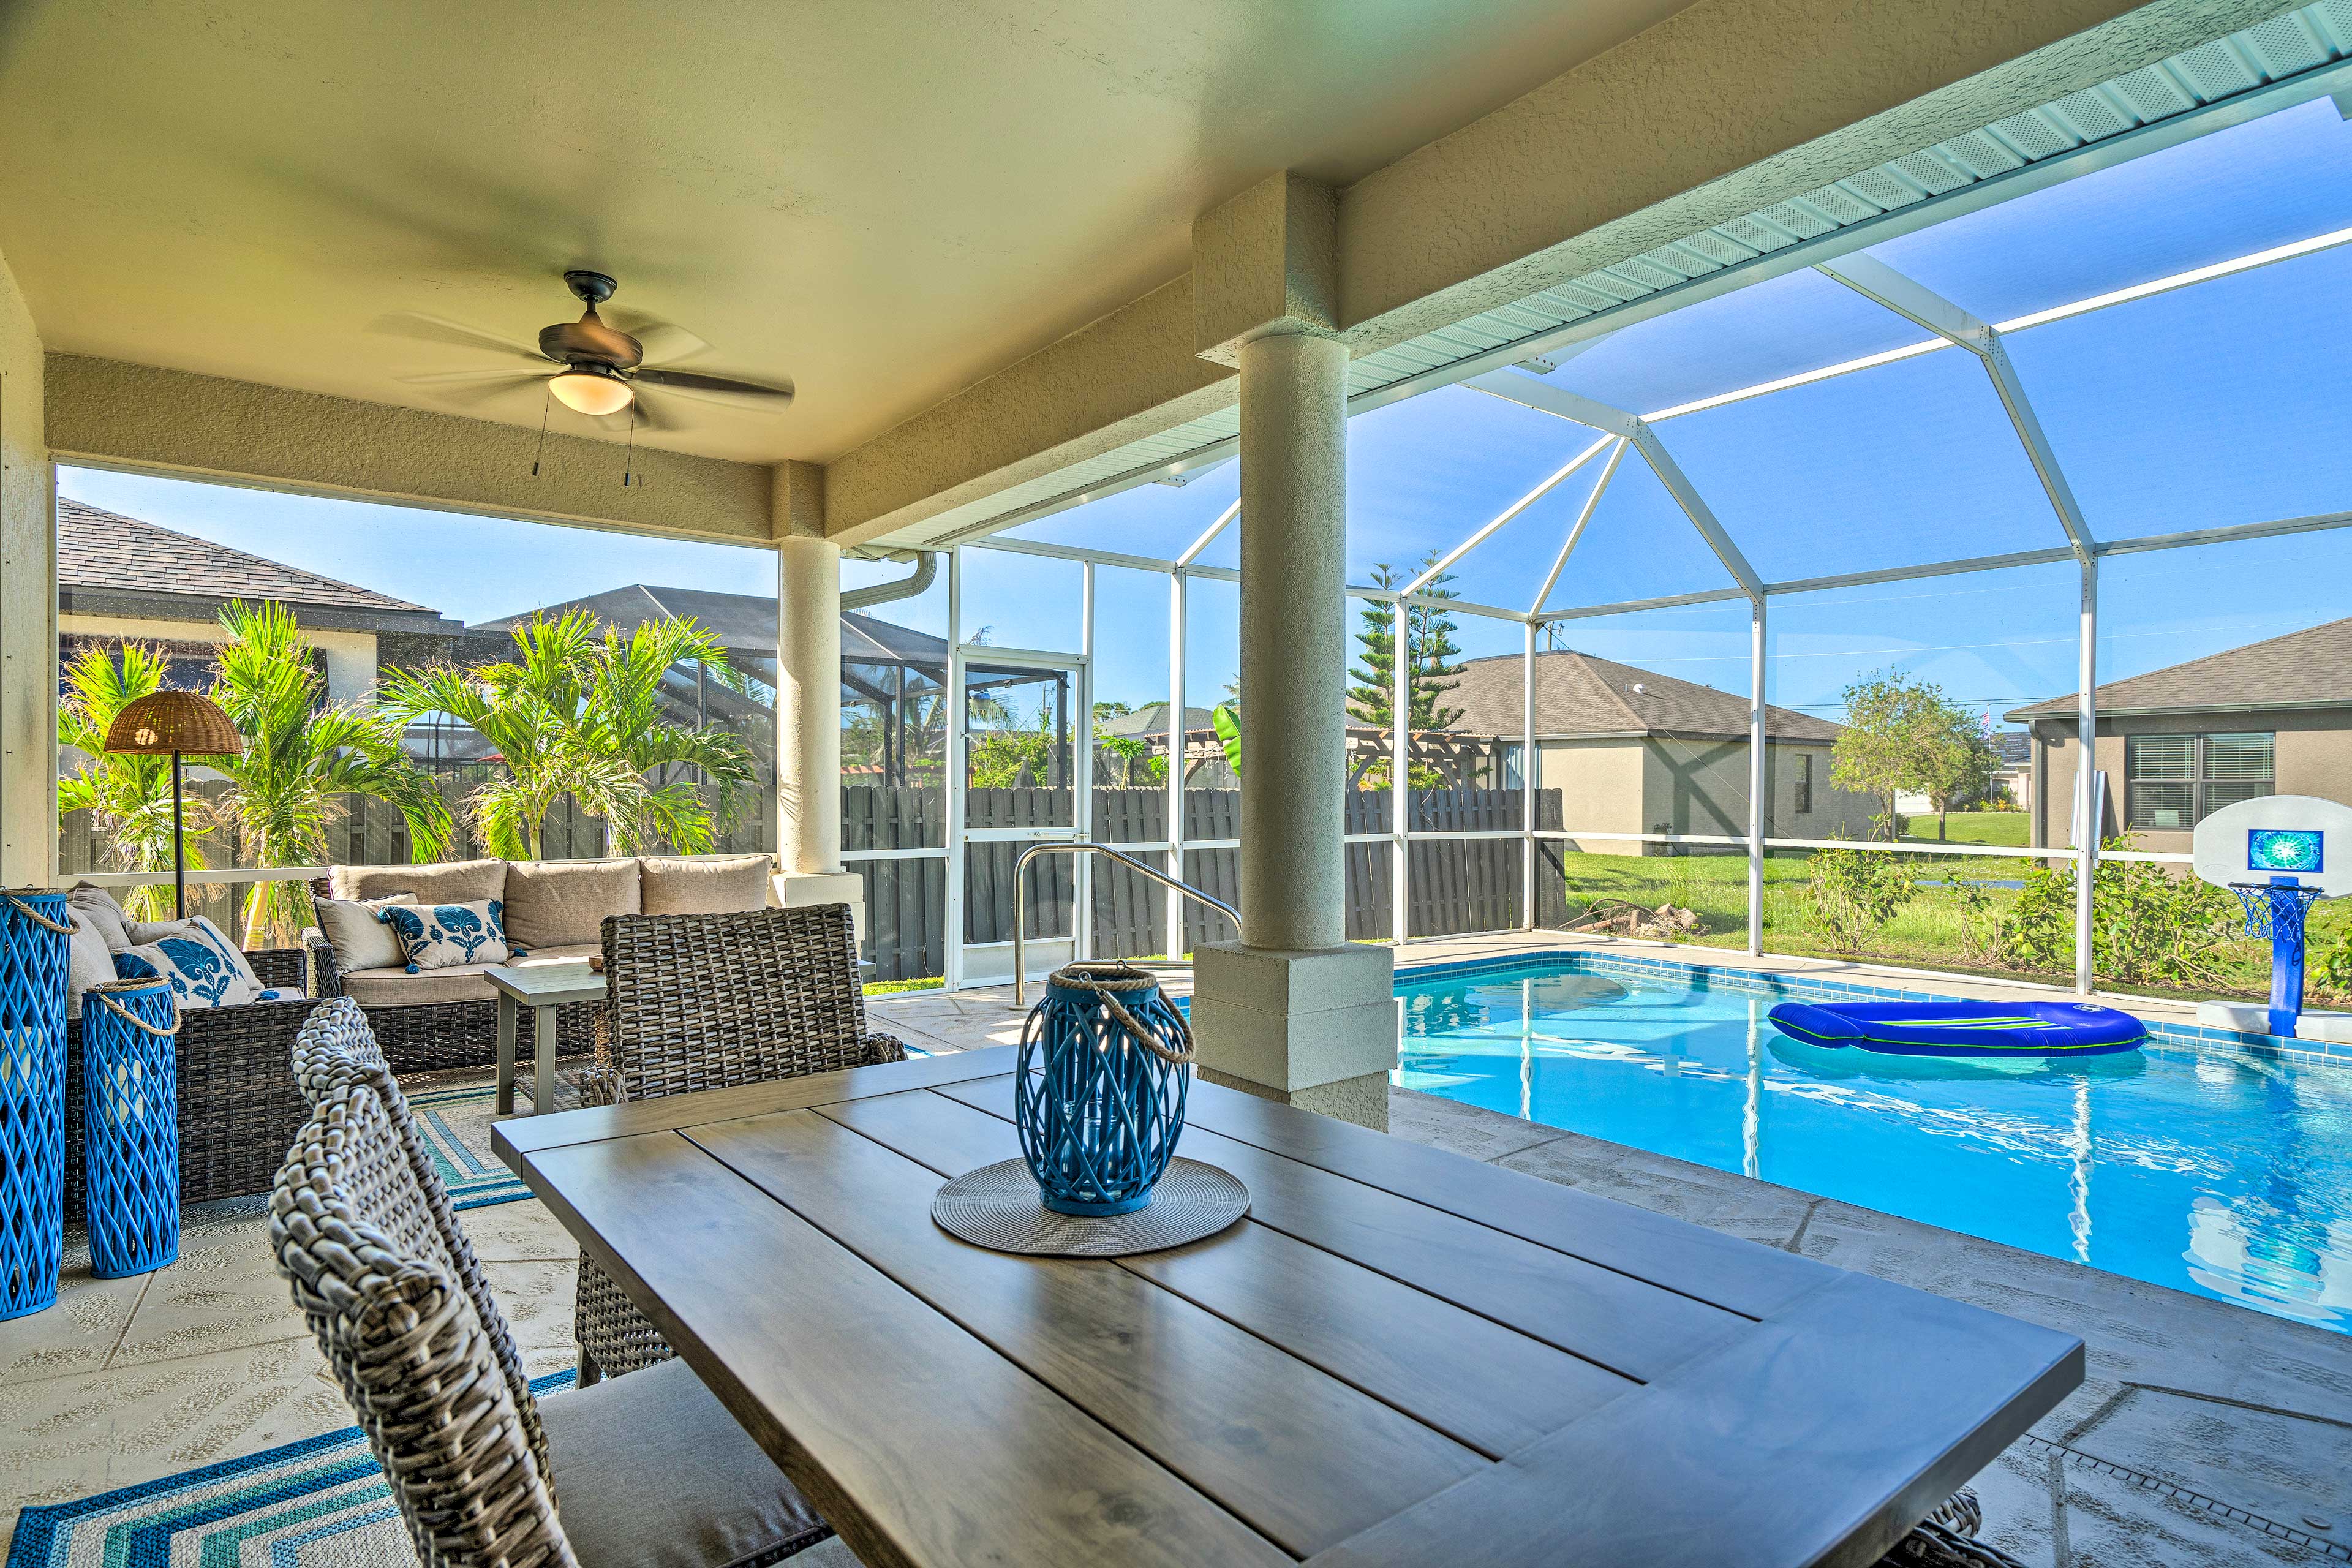 Property Image 2 - Cape Coral Home: Outdoor Pool, Screened Lanai